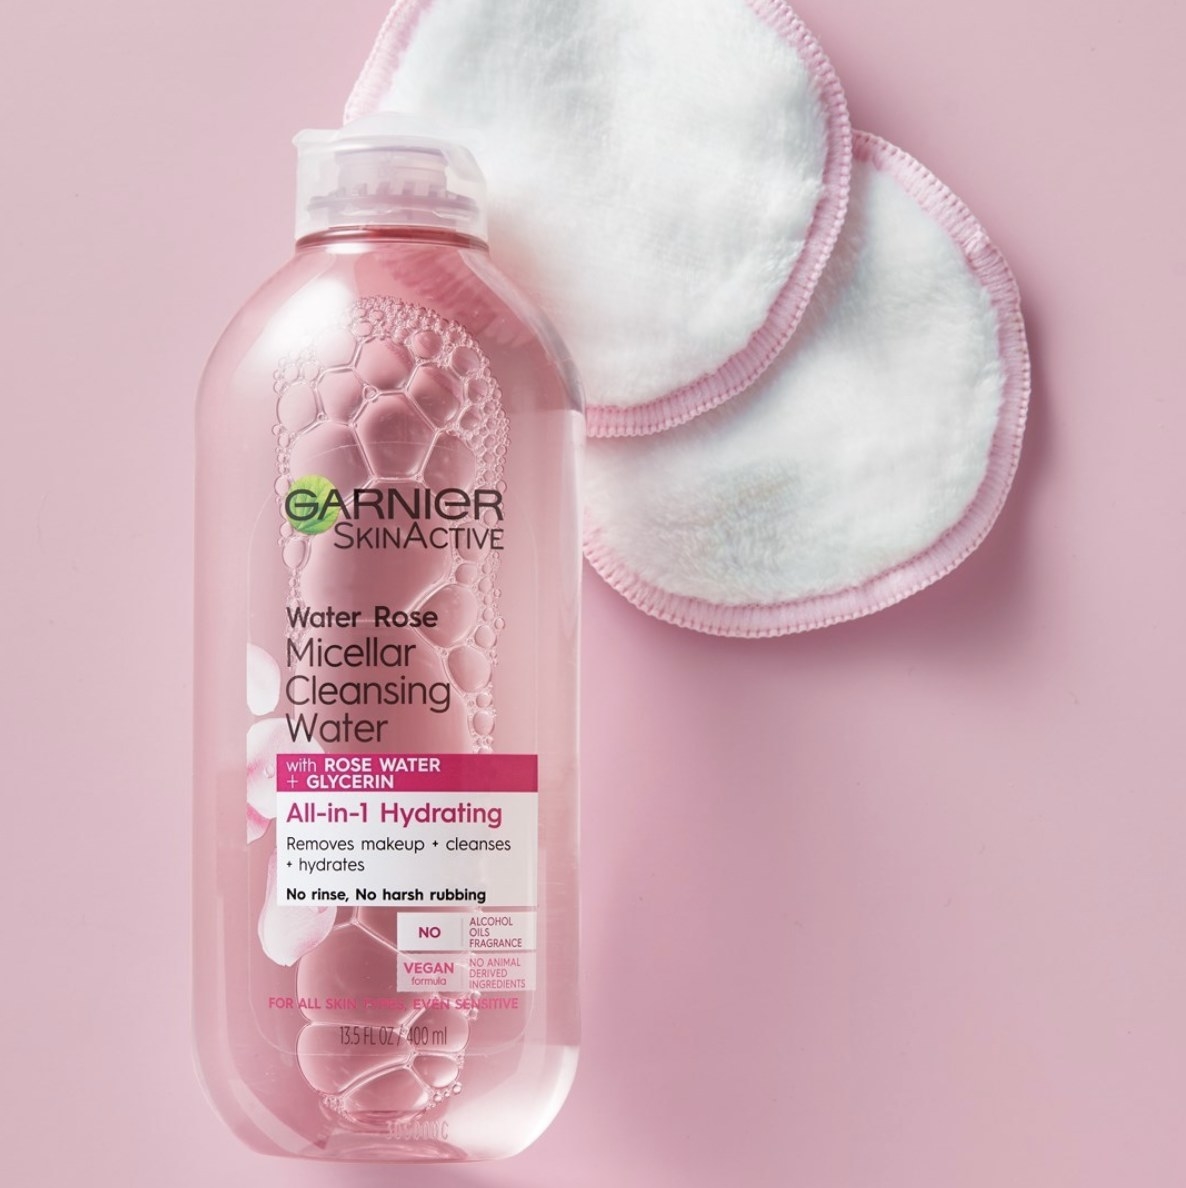 A bottle of micellar water with two cotton pads